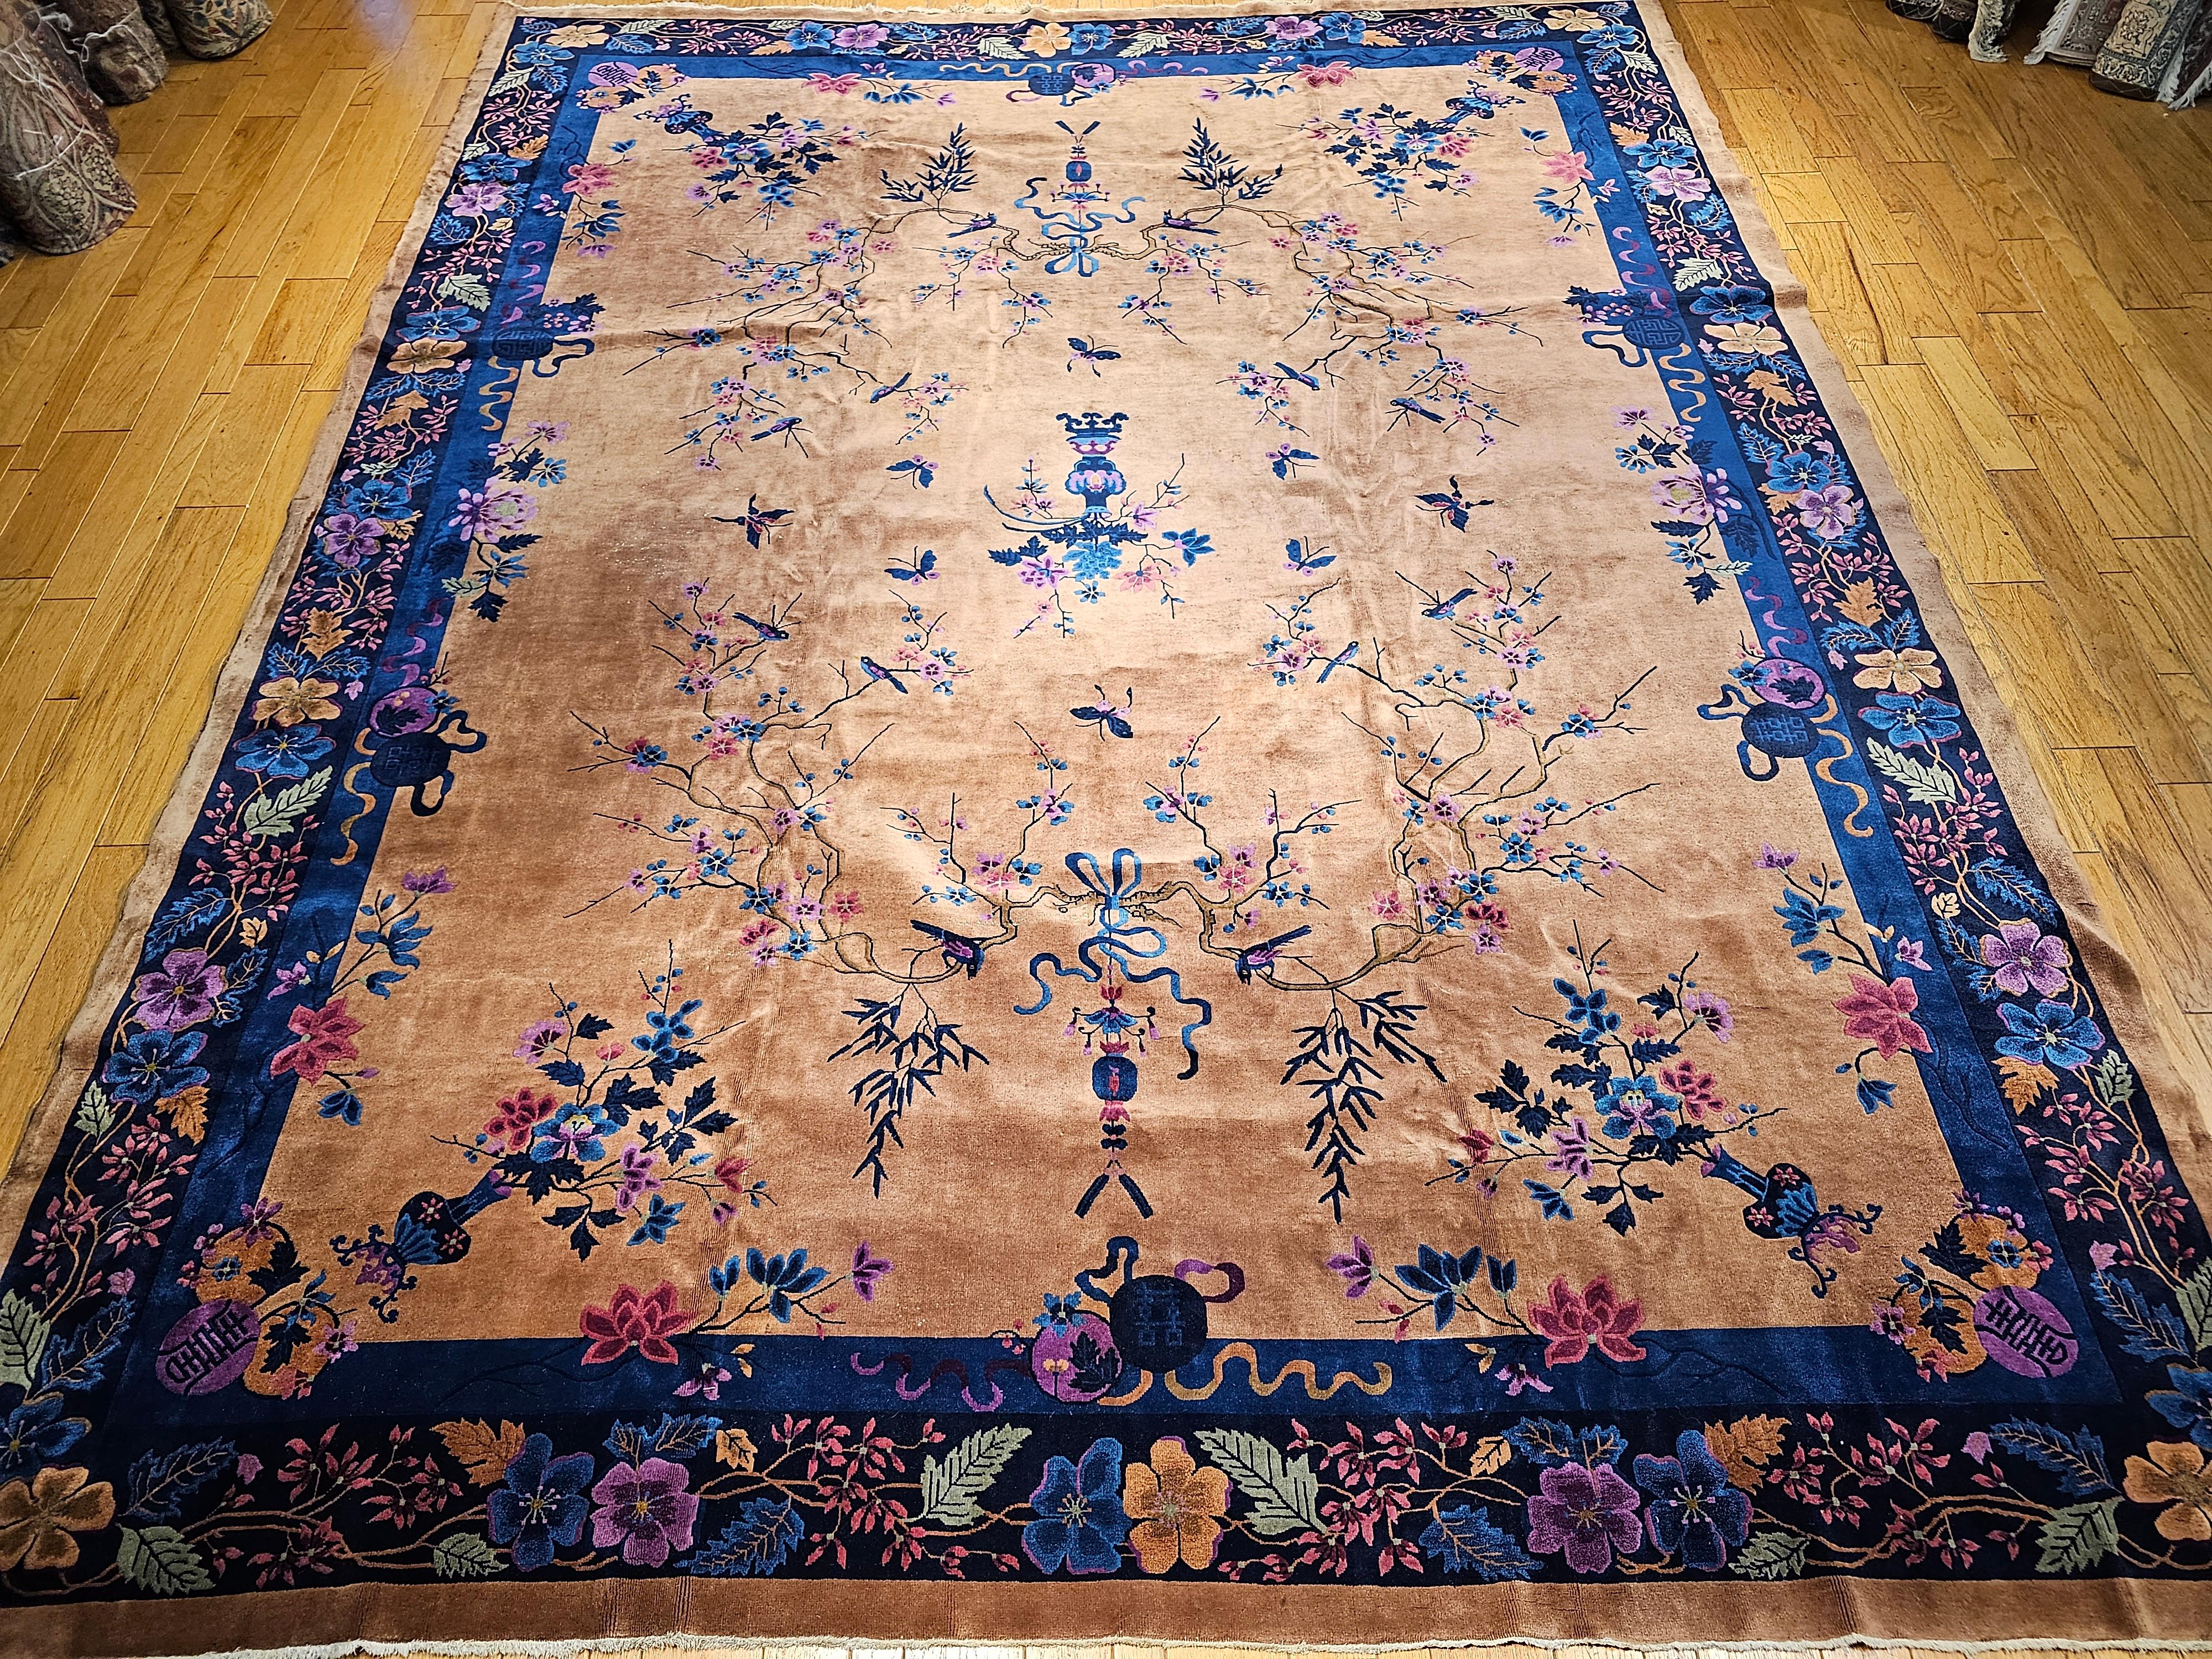 The extremely rare palace size Walter Nichols Art Deco Chinese rug in a tan or camelhair color background with floral patterns in pink, blue, red, and lavender.  The rug is from the 1st quarter of the 20th century and is around 100 years old and is